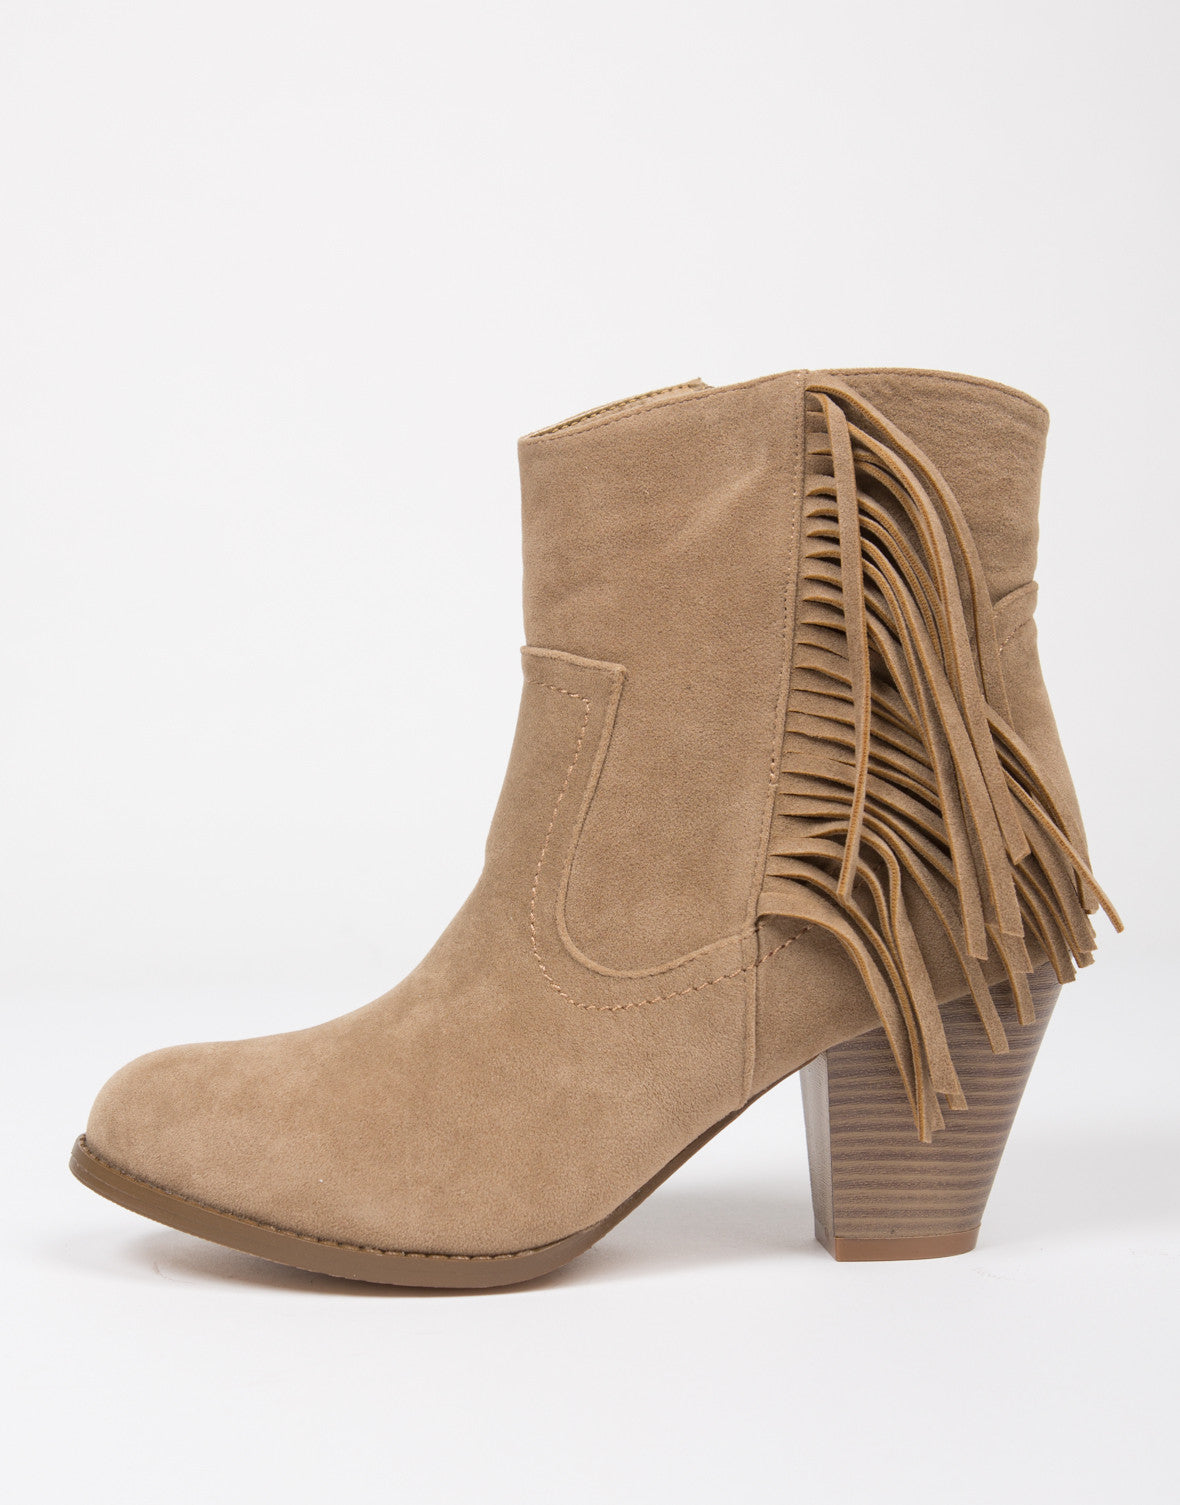 Fringed Suede Ankle Boots - Brown Ankle Boots - Fringe – Shoes – 2020AVE